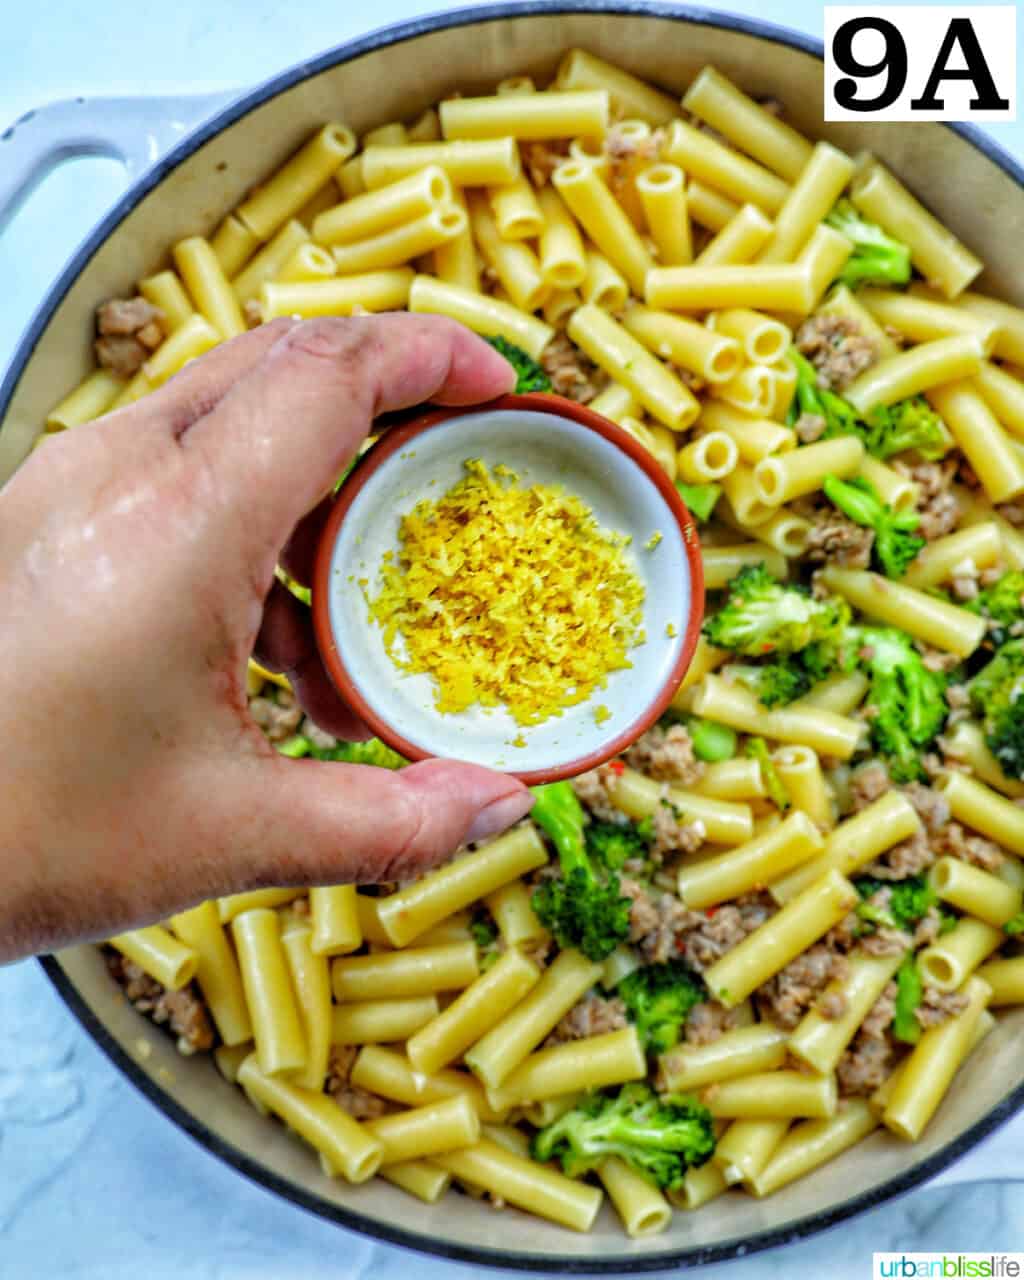 hand holding bowl of lemon zest over a skillet of broccoli and Italian sausage.